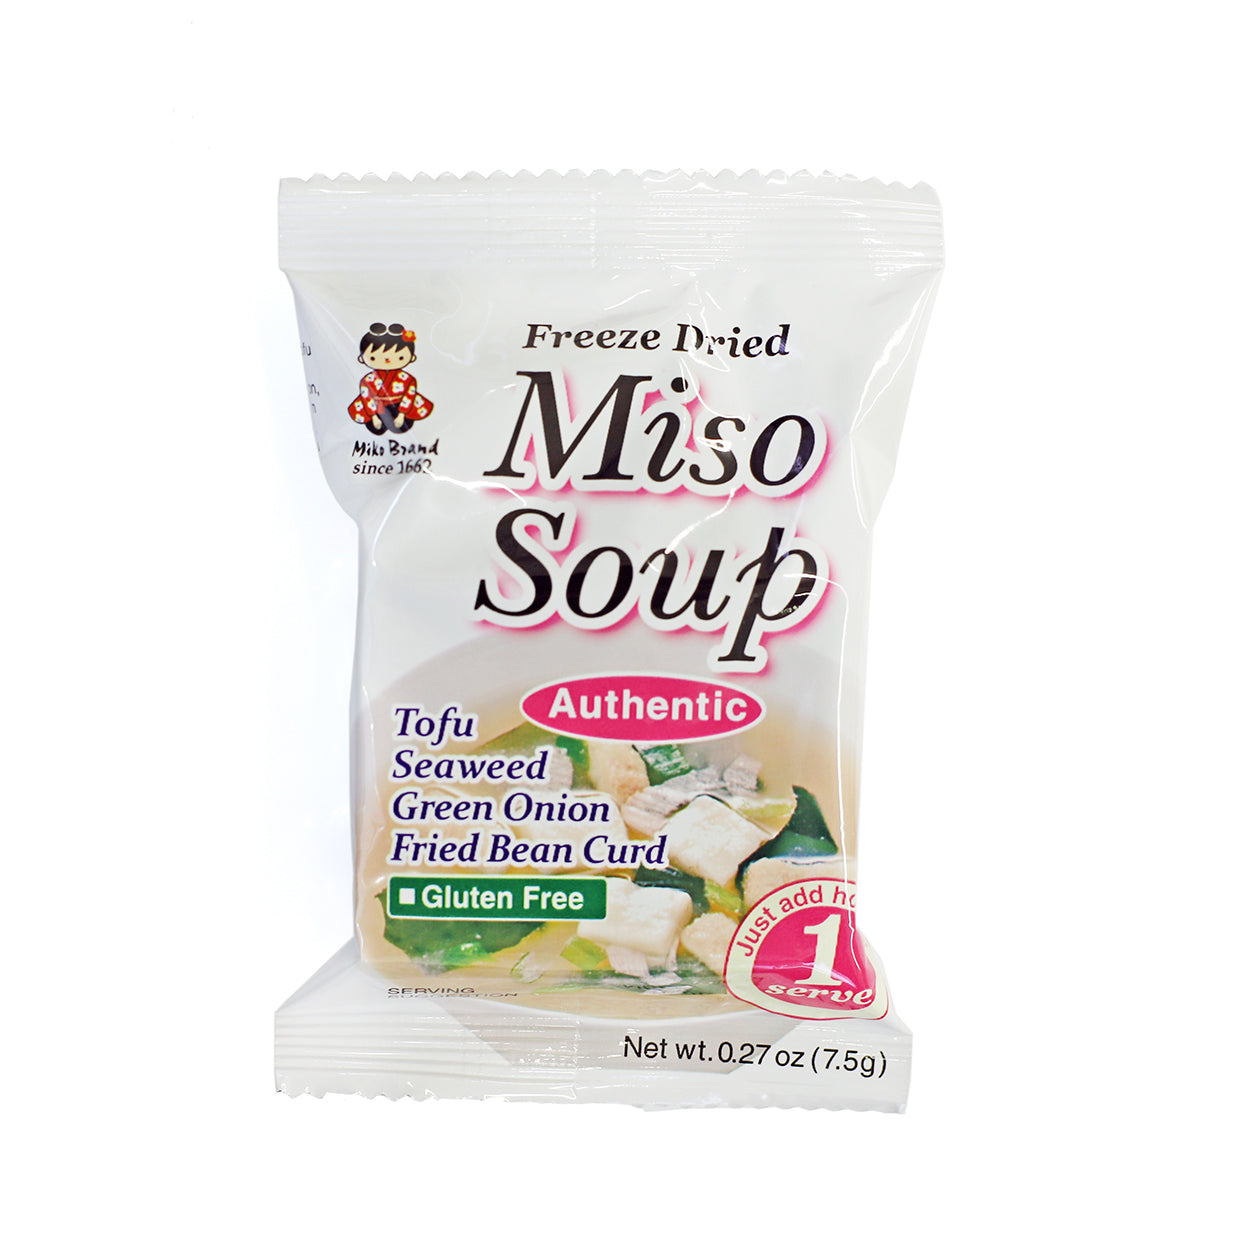 Shinshu-ichi Freeze Dried Instant Miso Soup - Japanese Grocery Home Delivery to NY NJ